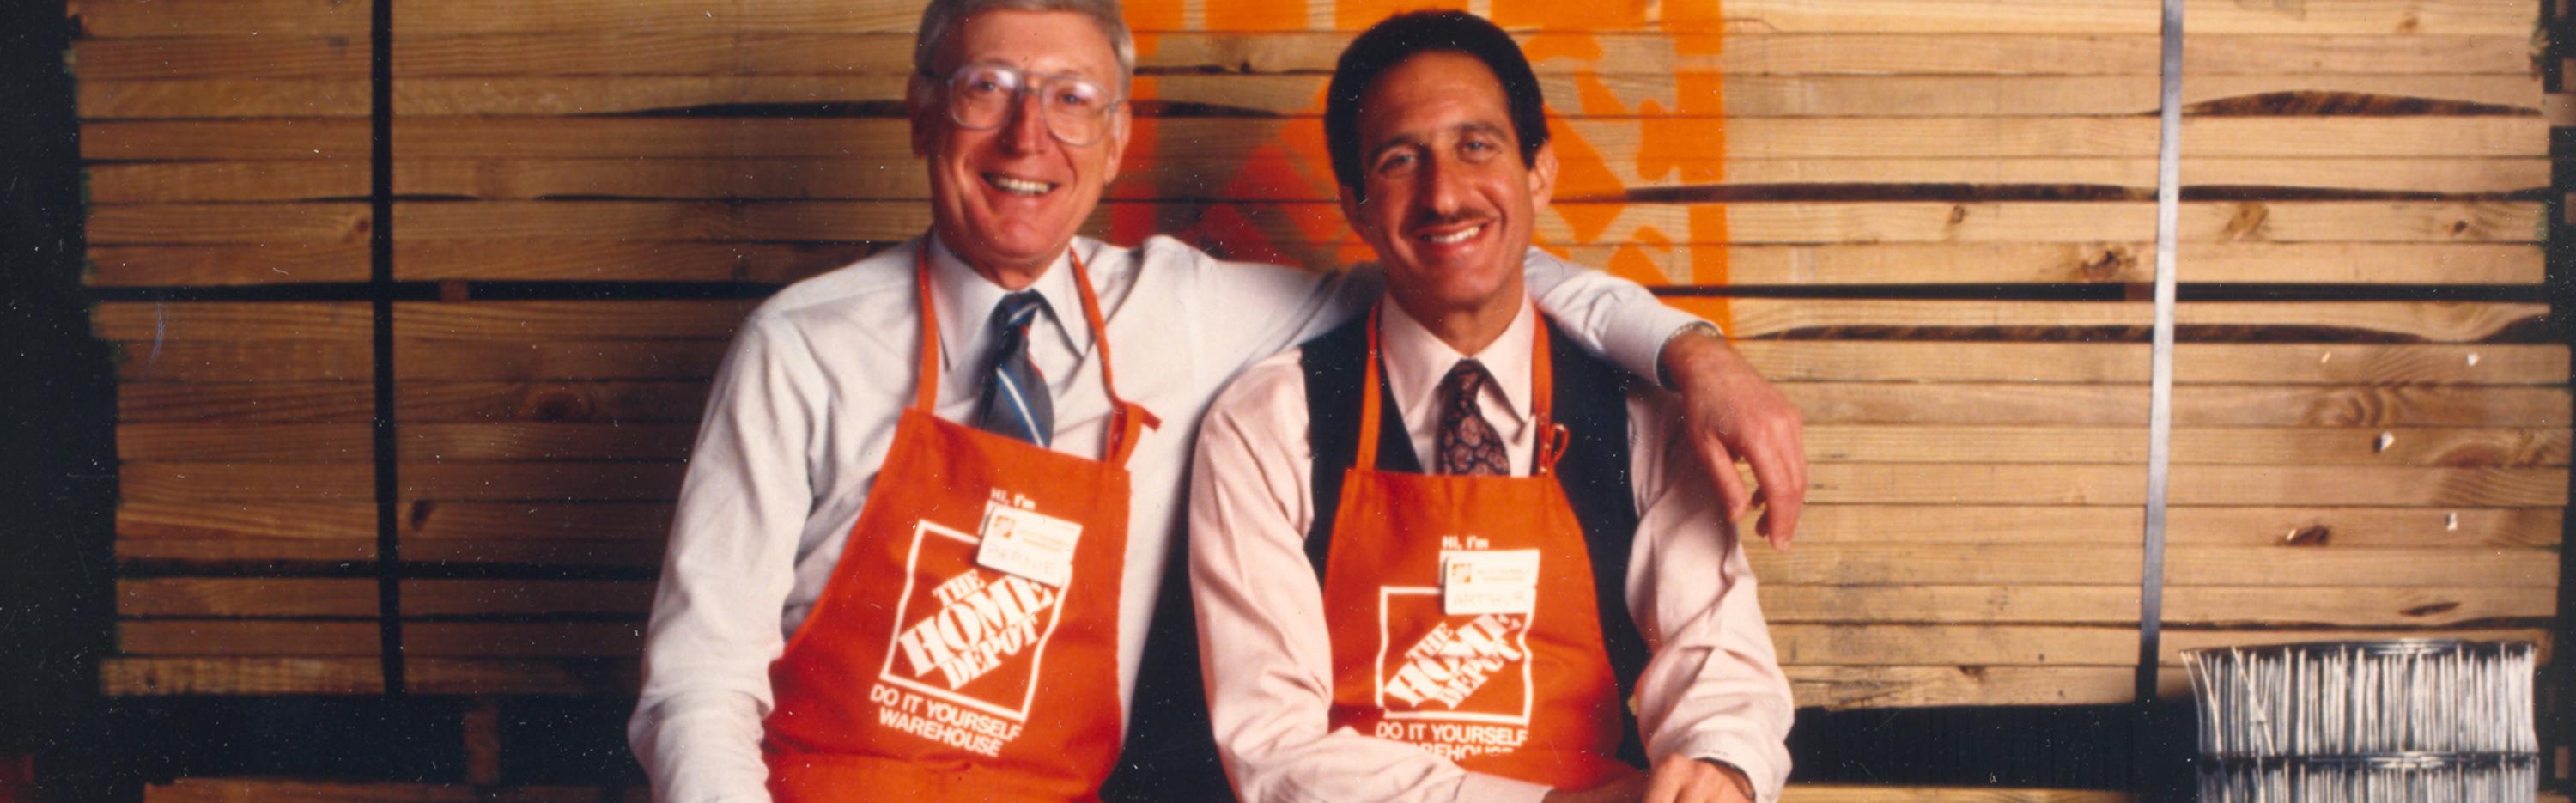 Bernie & Arthur The Founders of The Home Depot